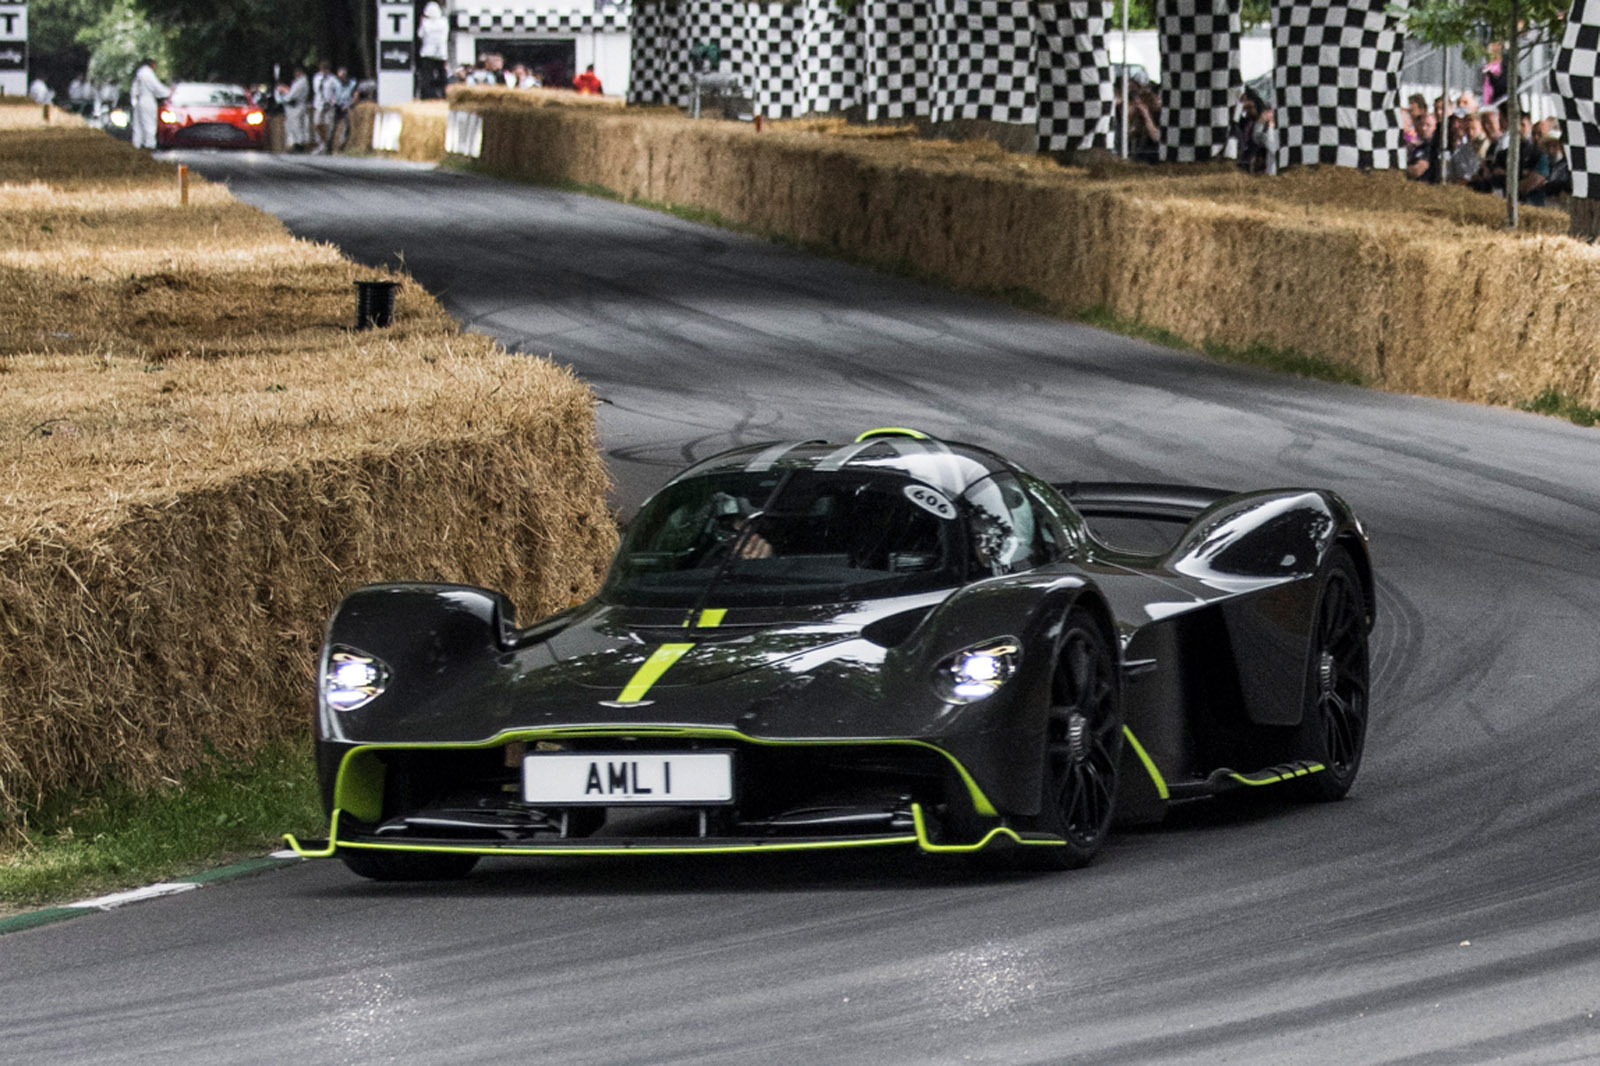 Racing lines: A ride in the Aston Martin Valkyrie | Autocar